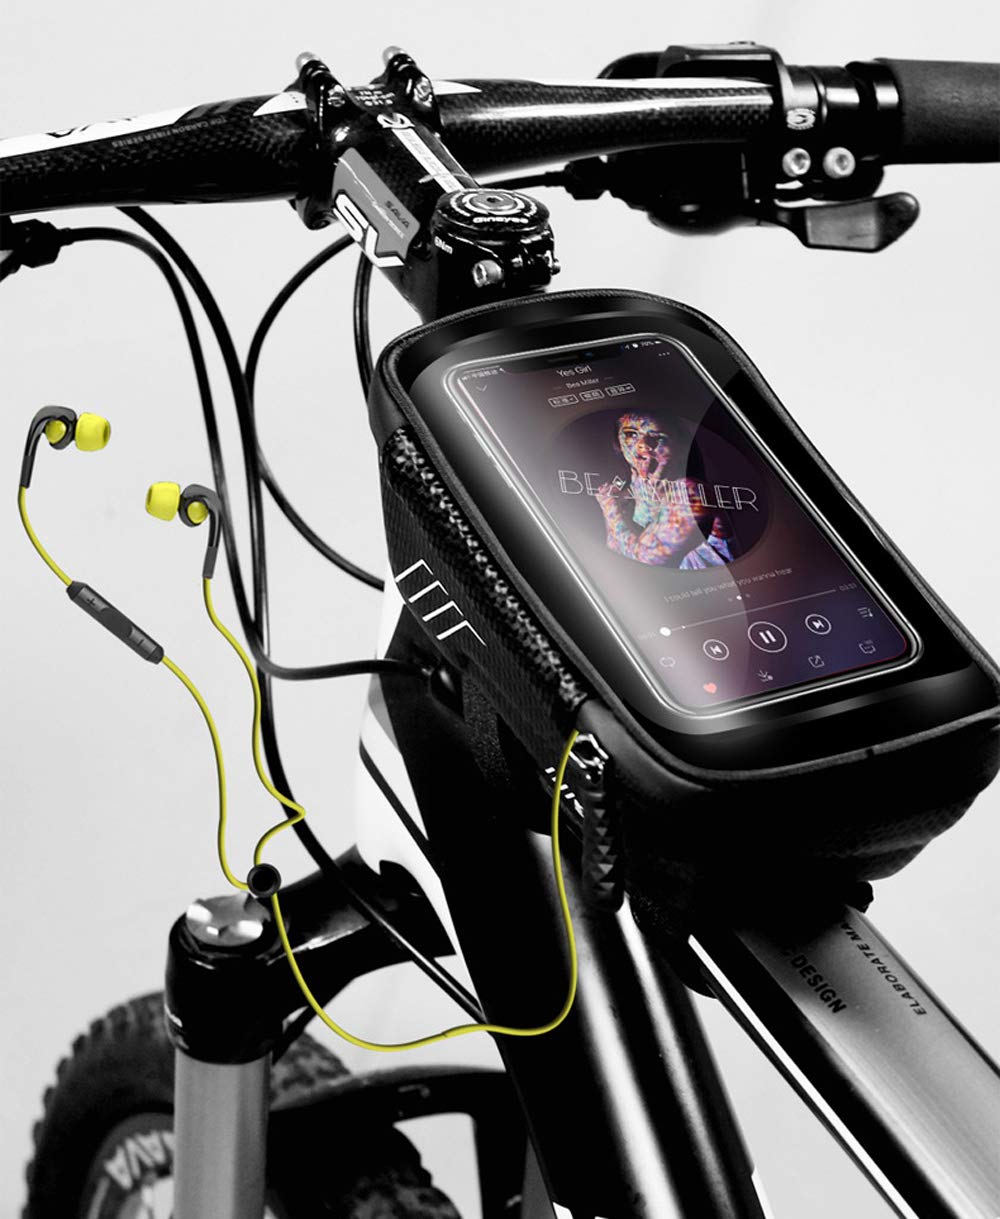 Bike Phone Mount Bag, Waterproof Bicycle Cycling Top Tube Handlebar Phone Holder Pouch Front Frame Storage Bag for iPhone 11 12 13 Pro Max, Galaxy S22 S21 Ultra S20 FE A12, Google Pixel 6, OnePlus 9 8